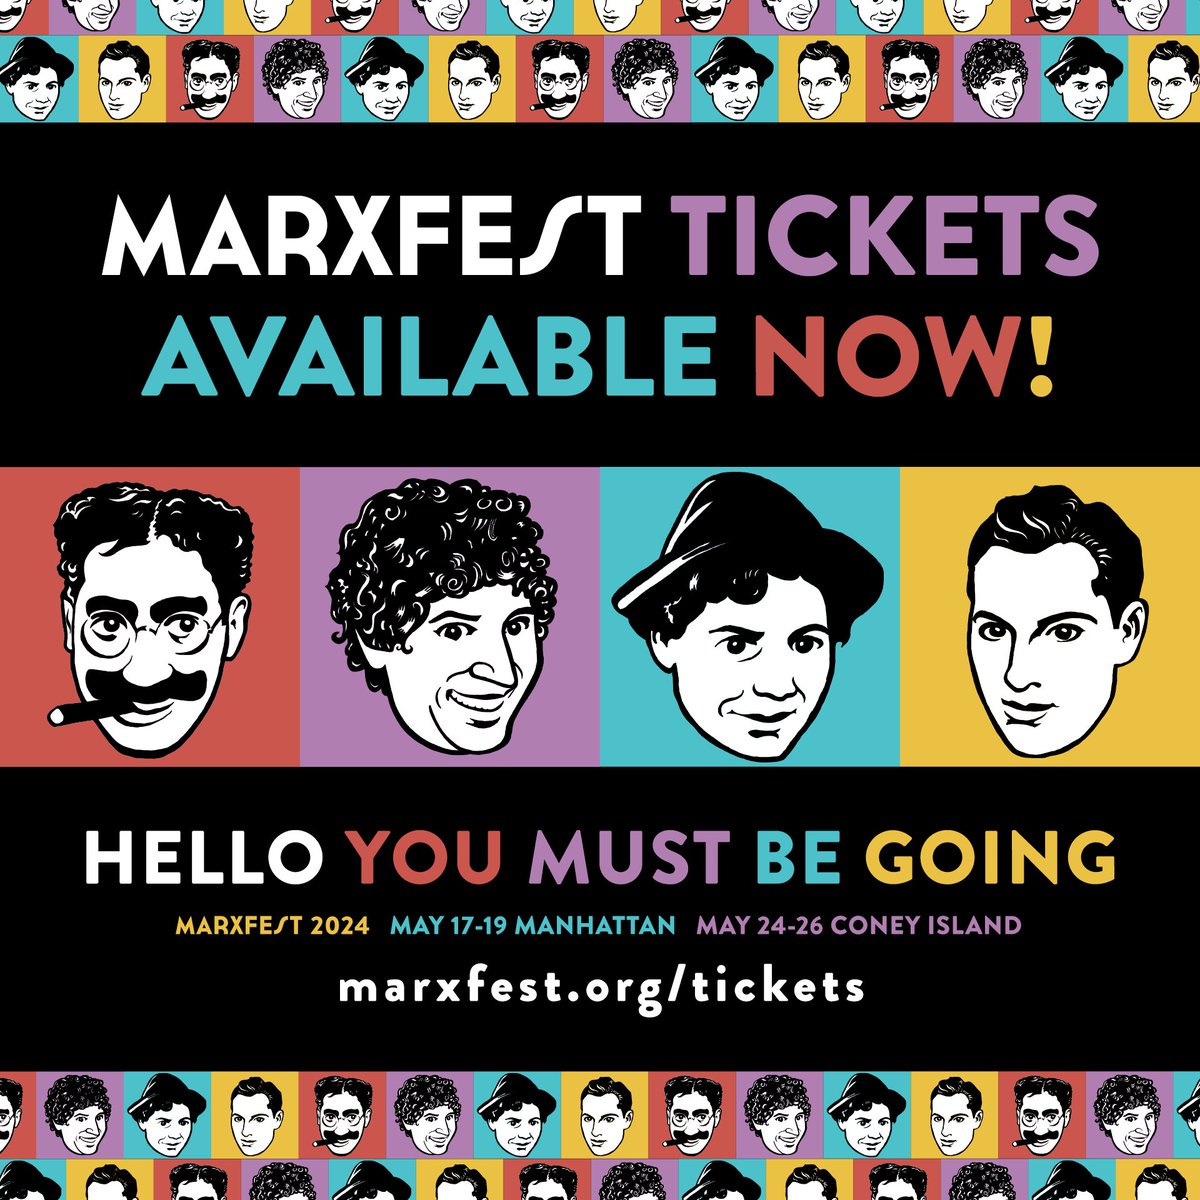 HELLO, YOU MUST BE GOING! Tickets to Marxfest 2024 are now available for purchase at marxfest.org/tickets